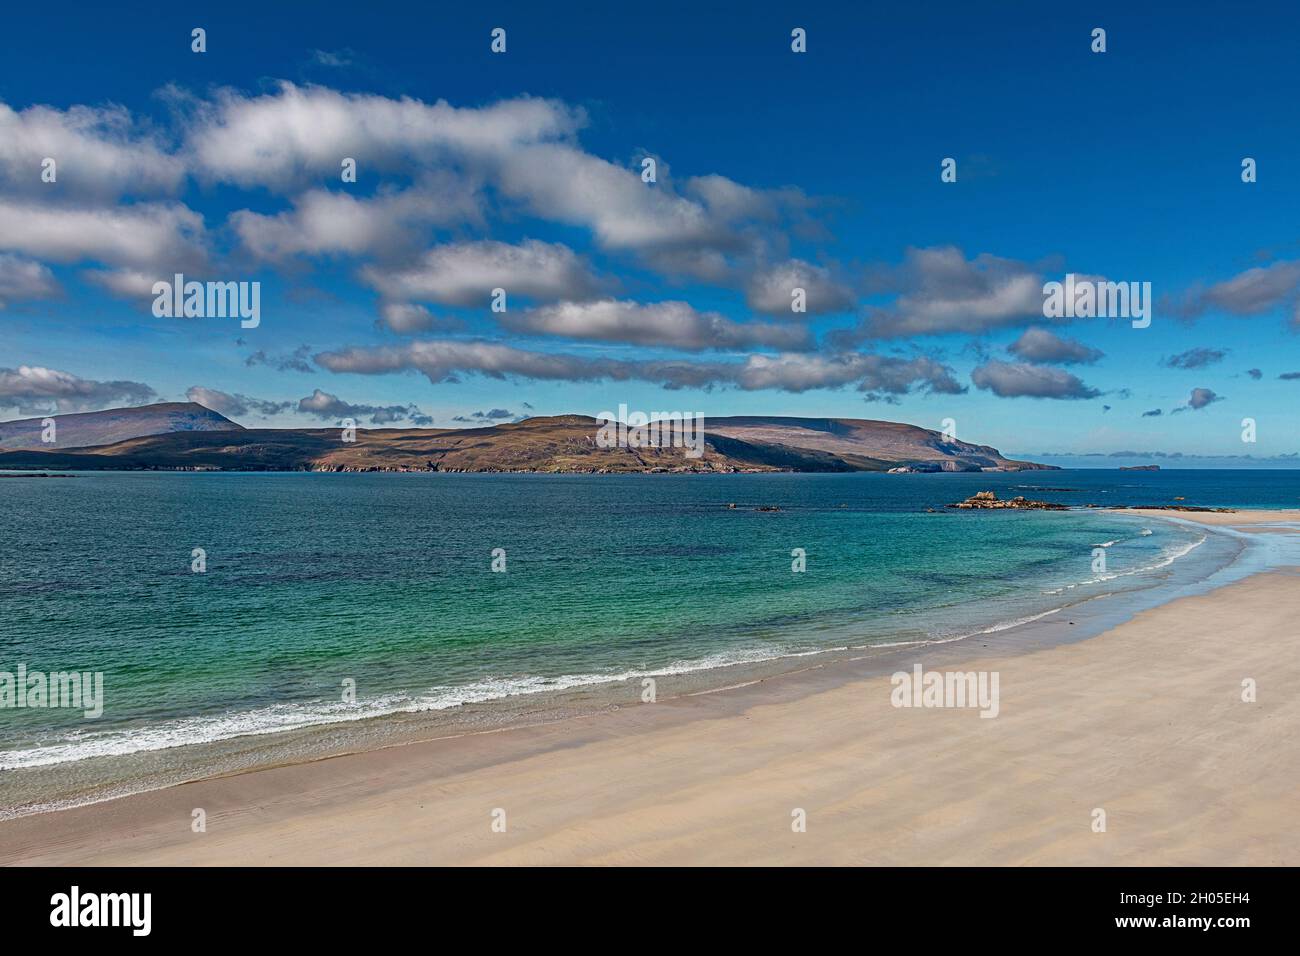 DURNESS SUTHERLAND SCOTLAND A BLUE SKY GEEN BLUE SEA AND SAND COVERED BEACH IN LATE SUMMER Stock Photo